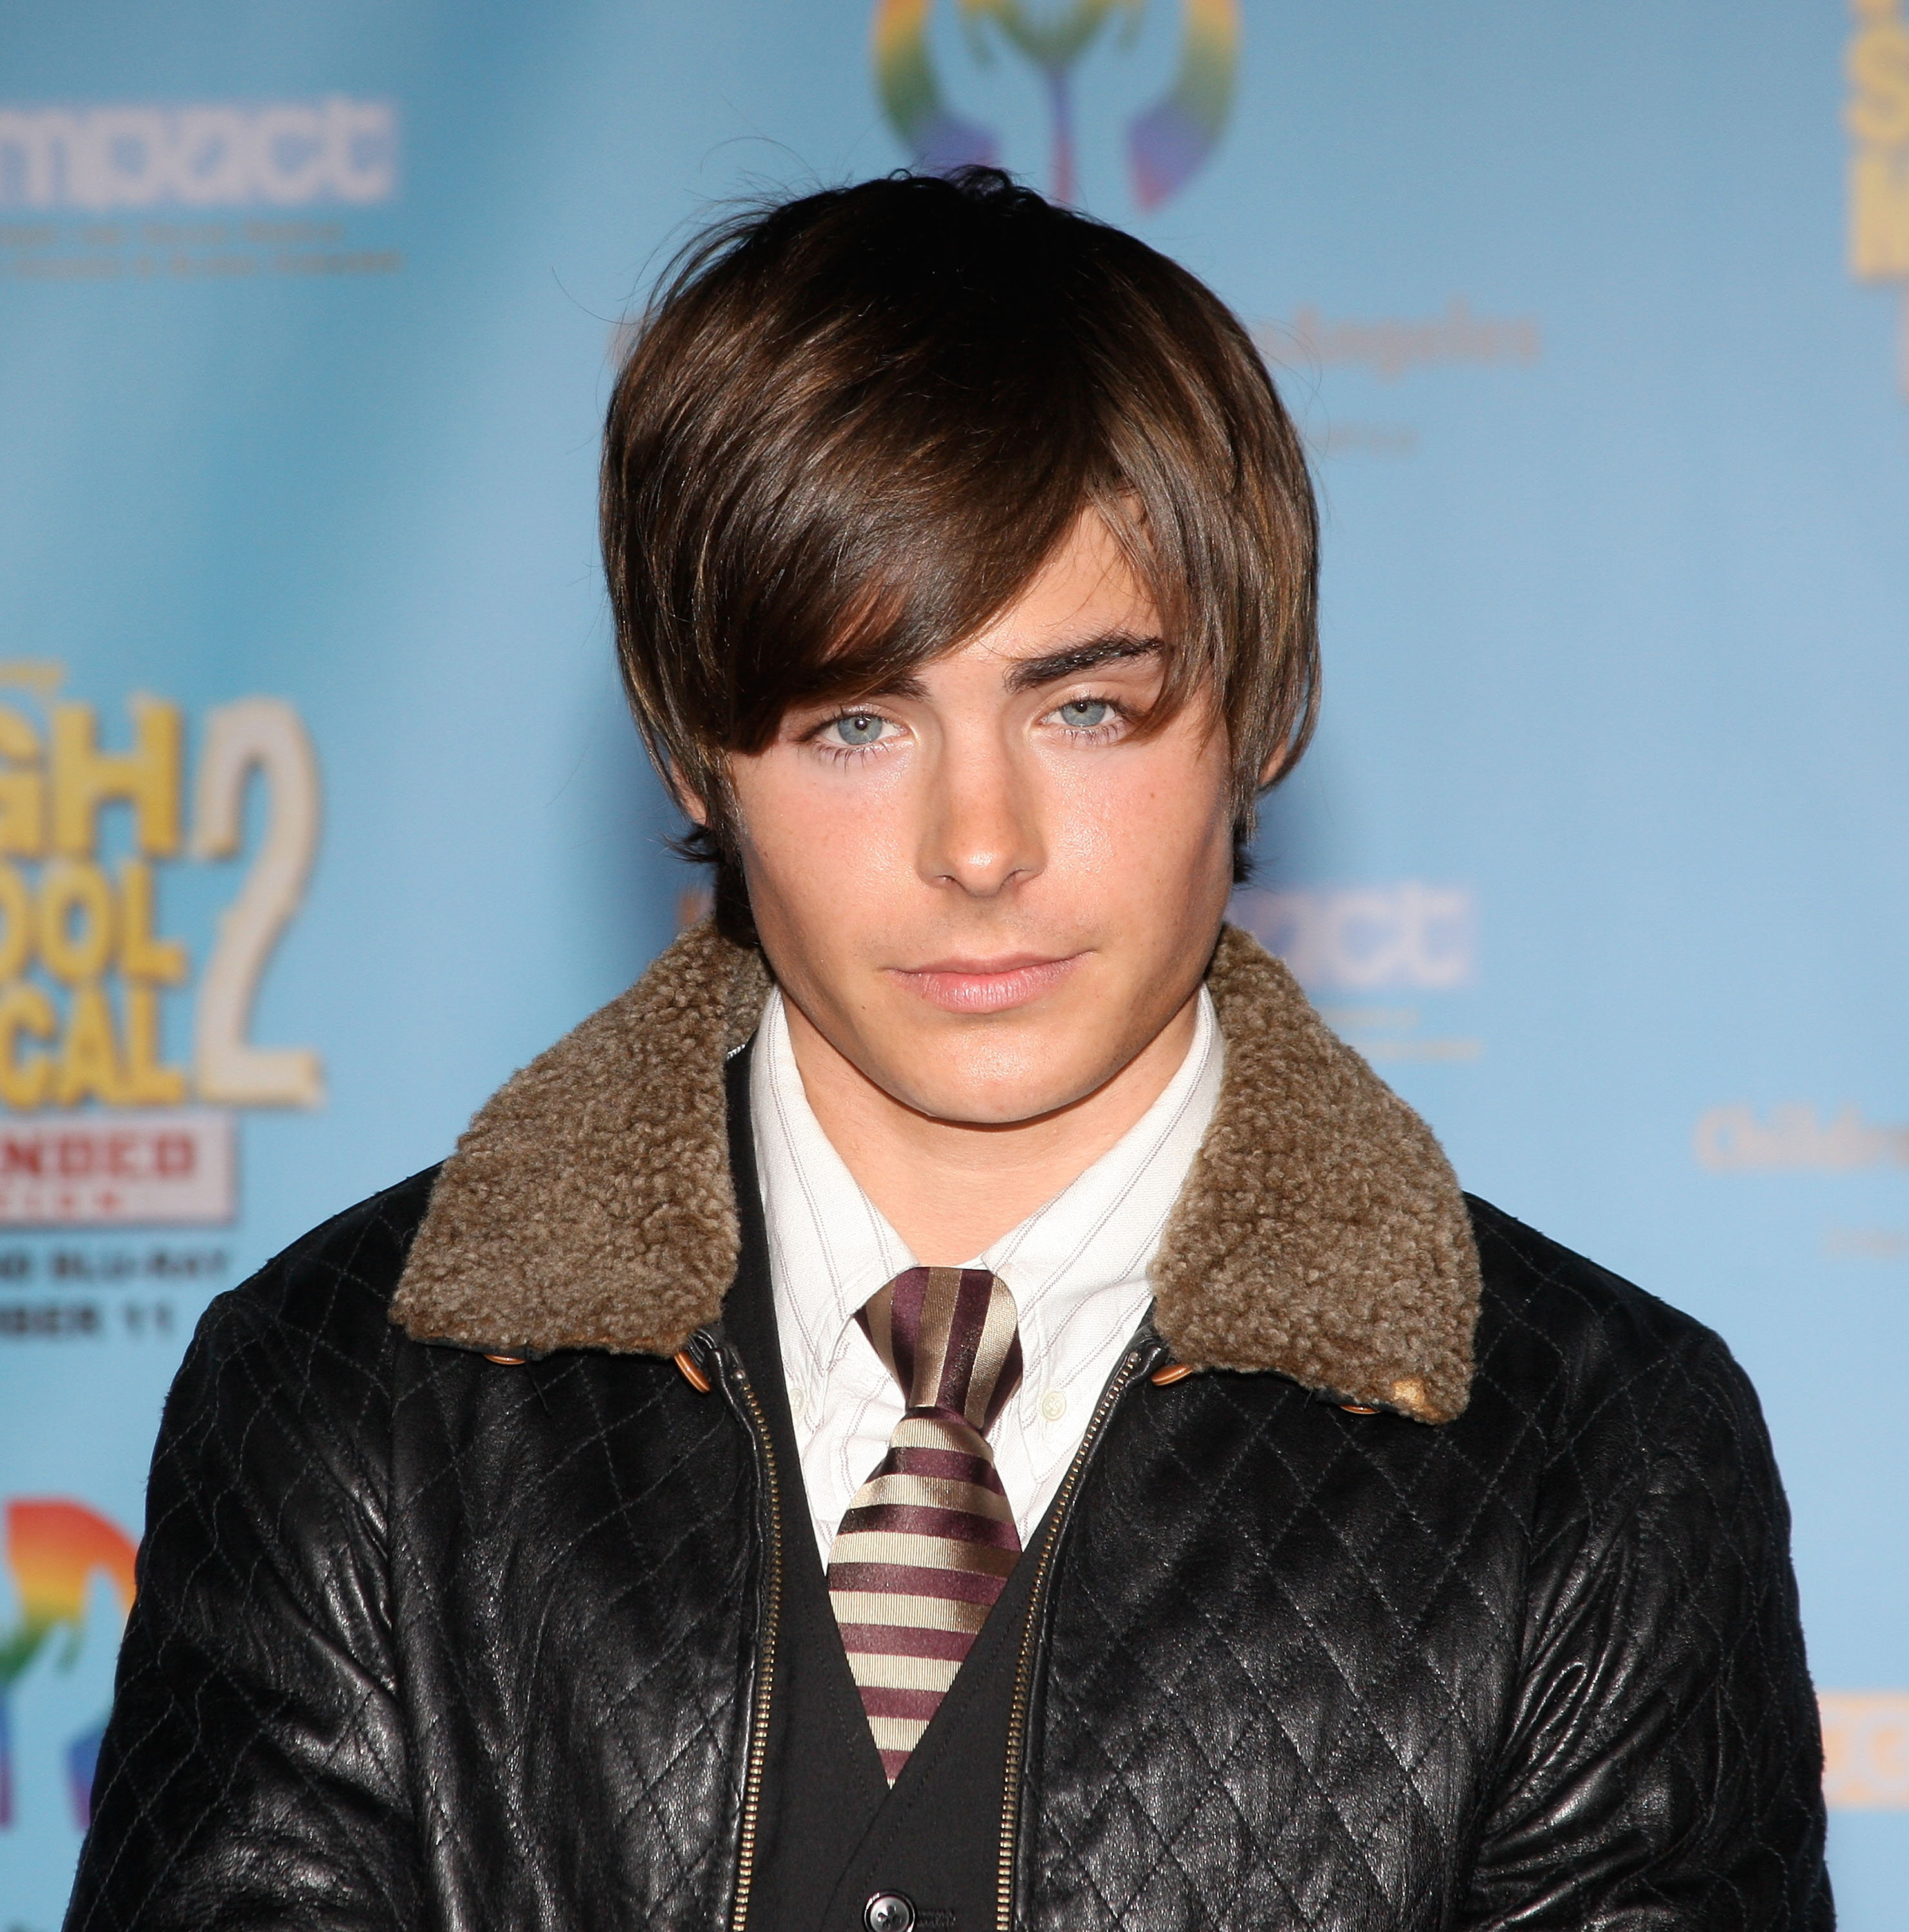 Close-up of a younger Zac at a media event